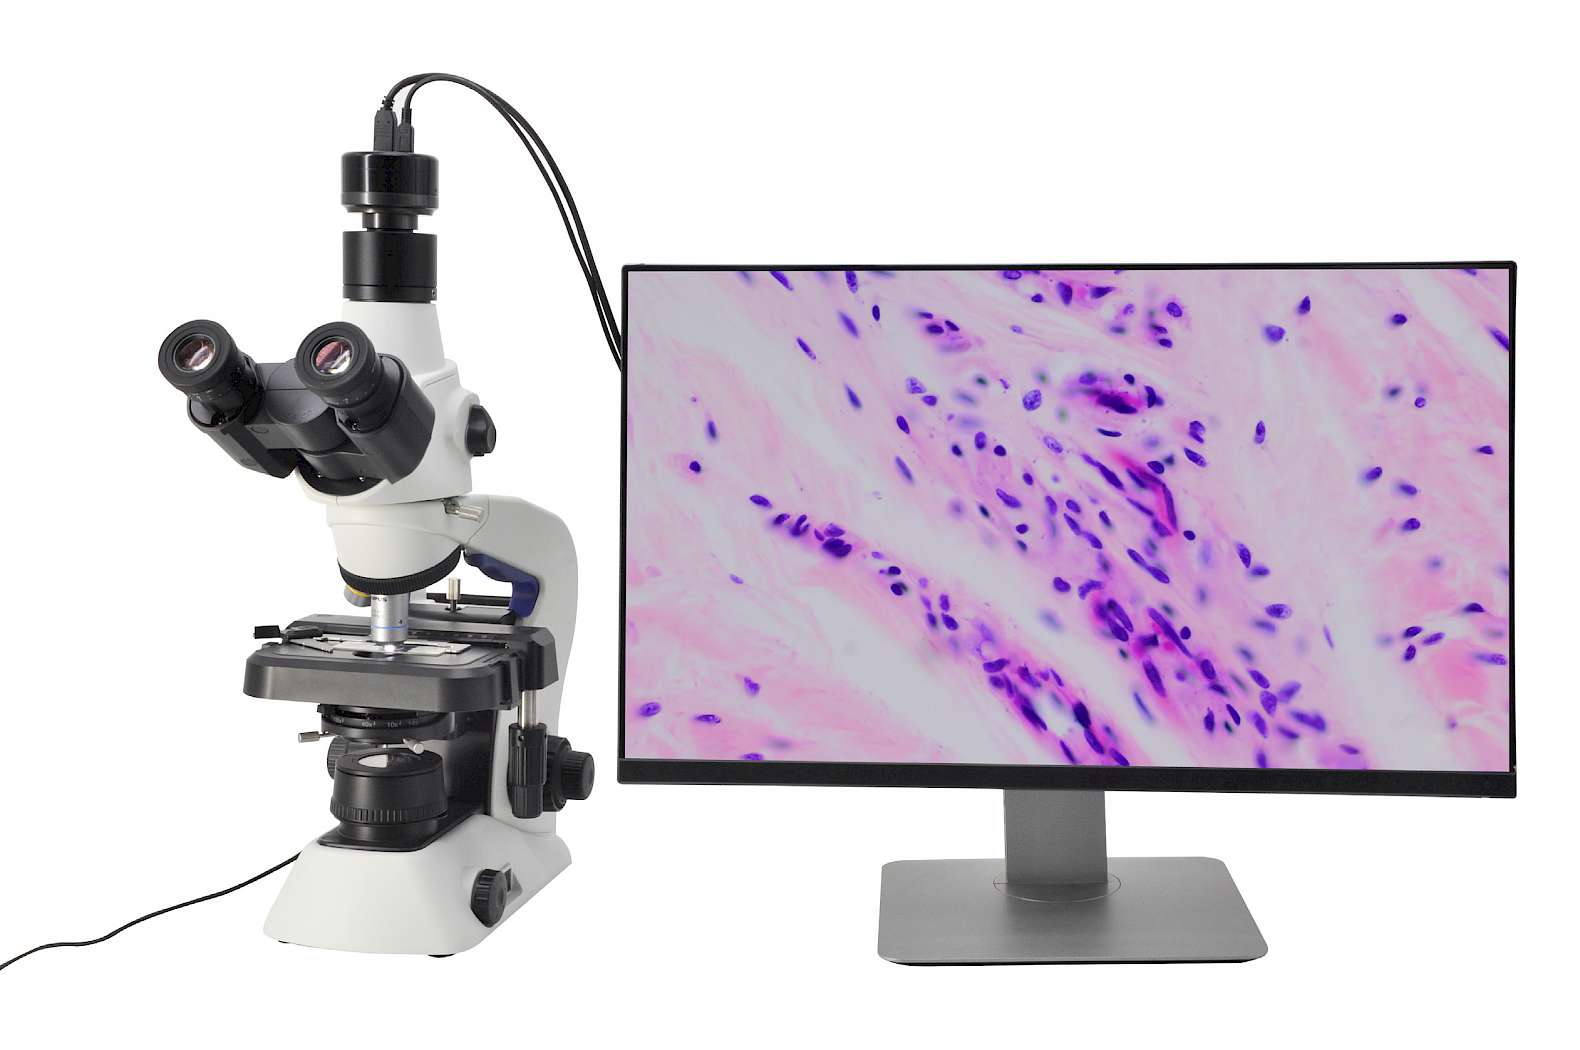 DM210 and its Biological Microscope + Display